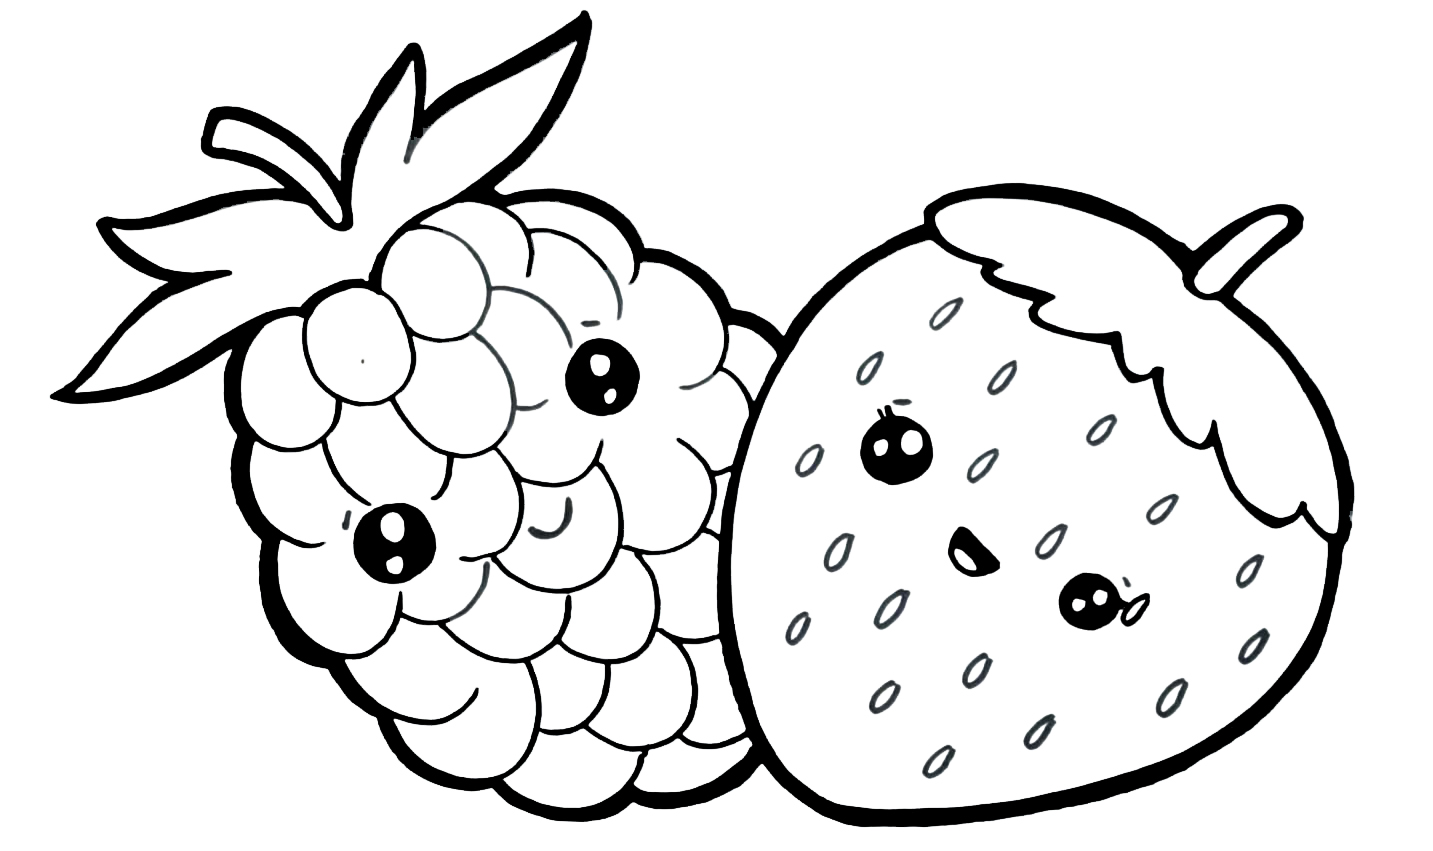 Coloring page For kids Strawberries and grapes